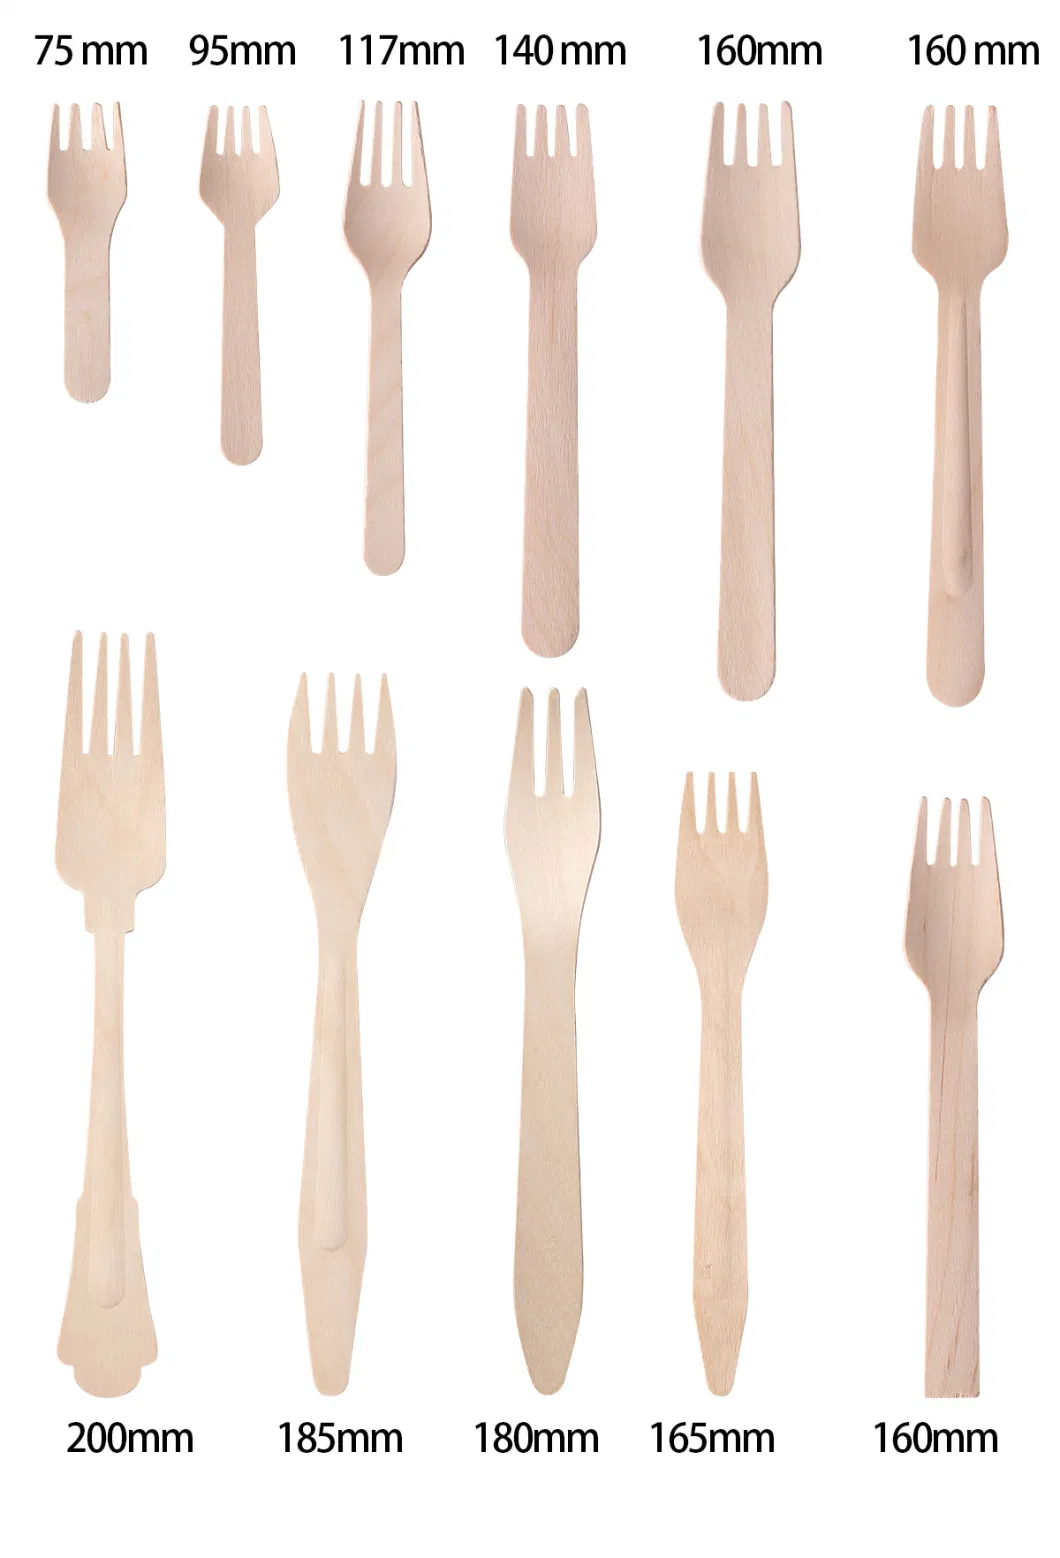 Fans Wooden Spoon Knives and Forks Disposable Travel Wooden